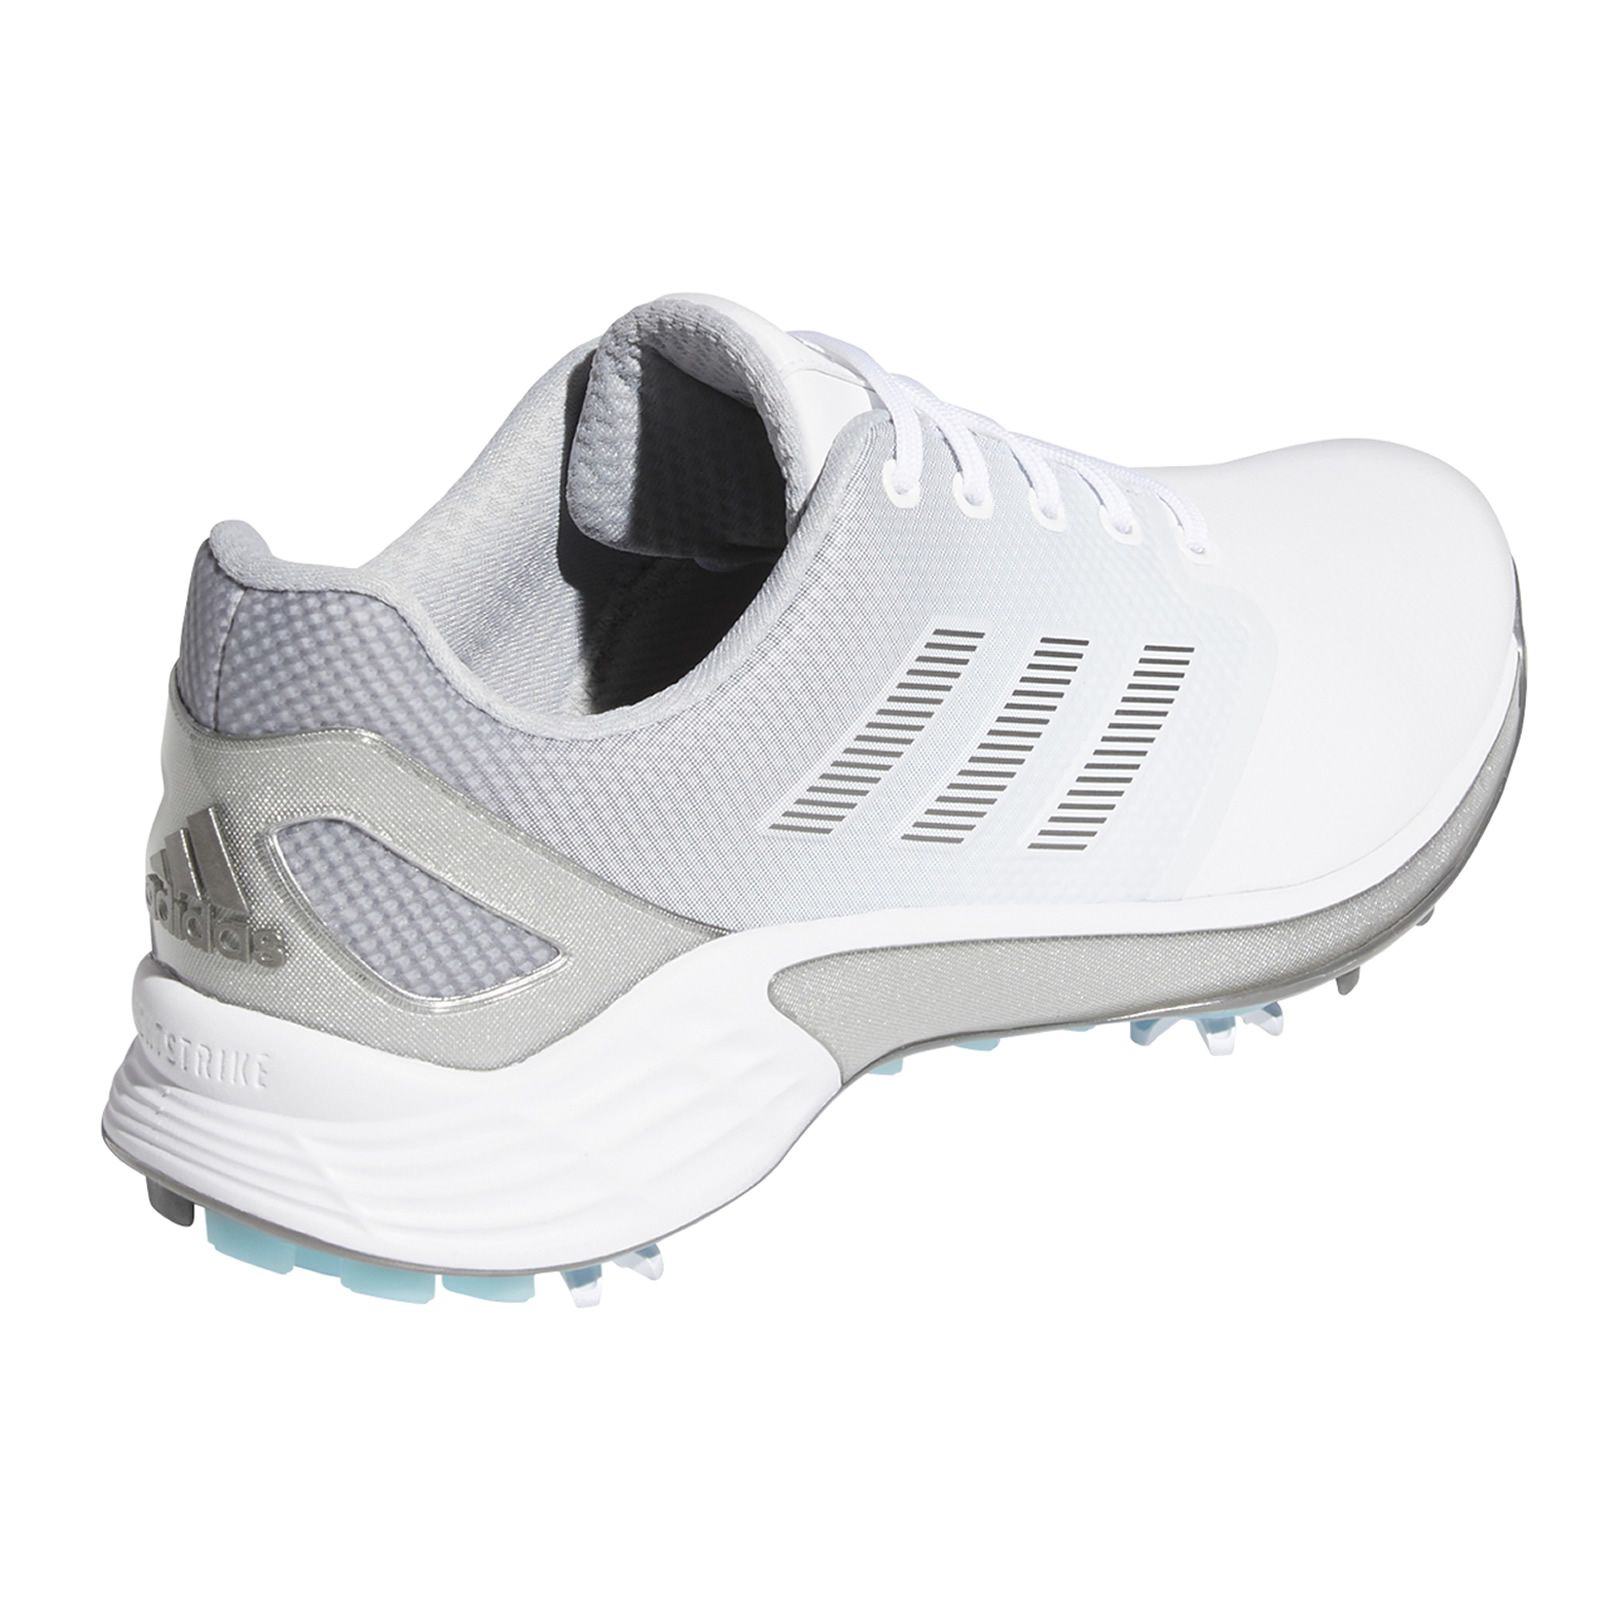 Buy the for sale adidas zg21 golf shoes